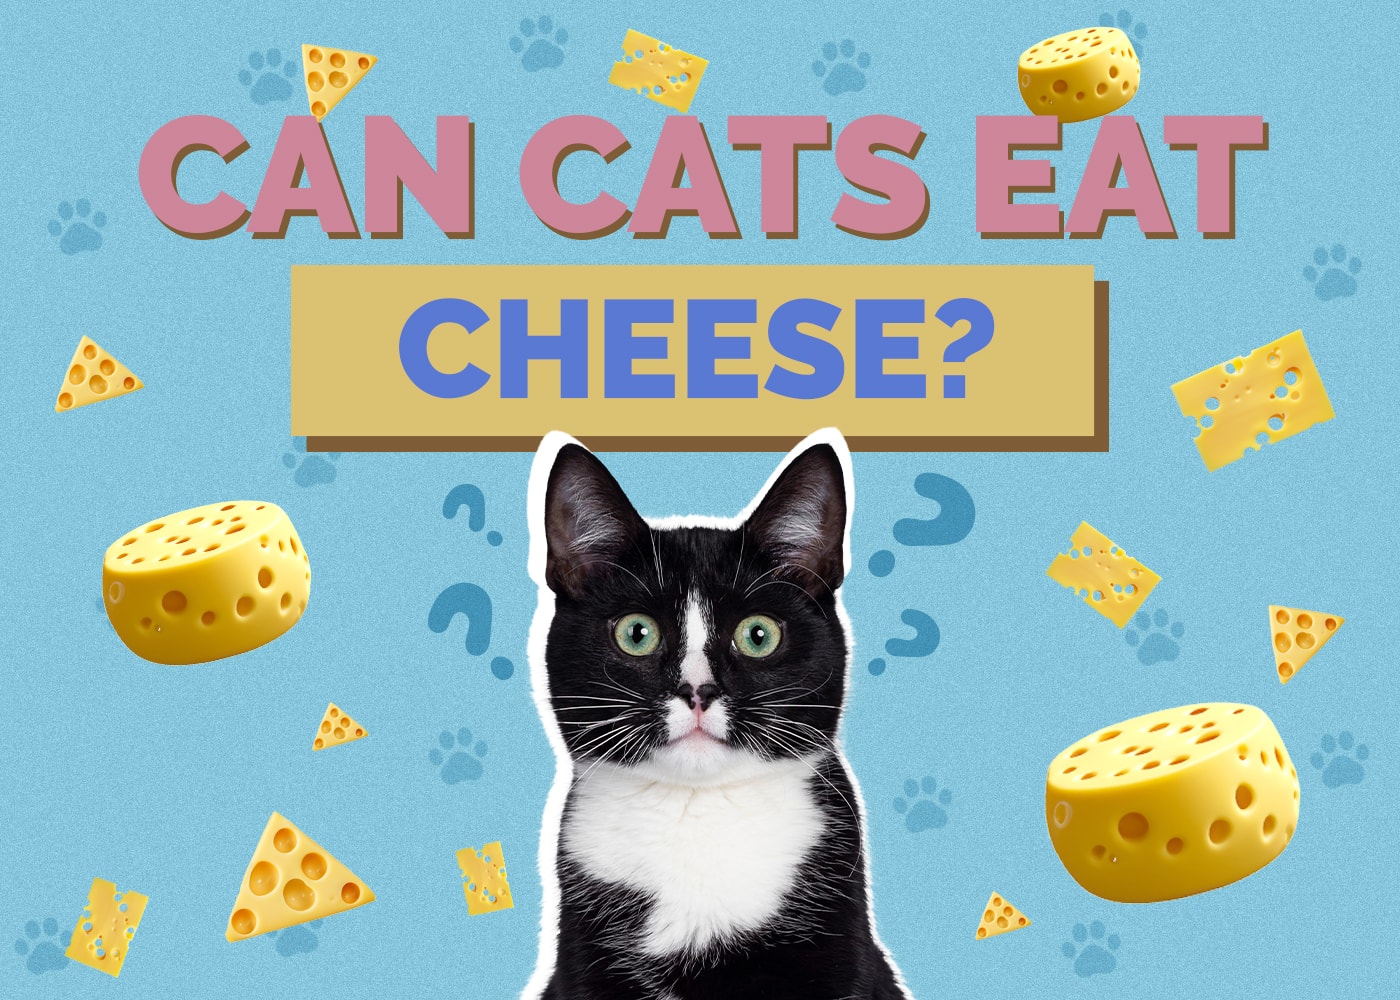 Can Cats Eat cheese